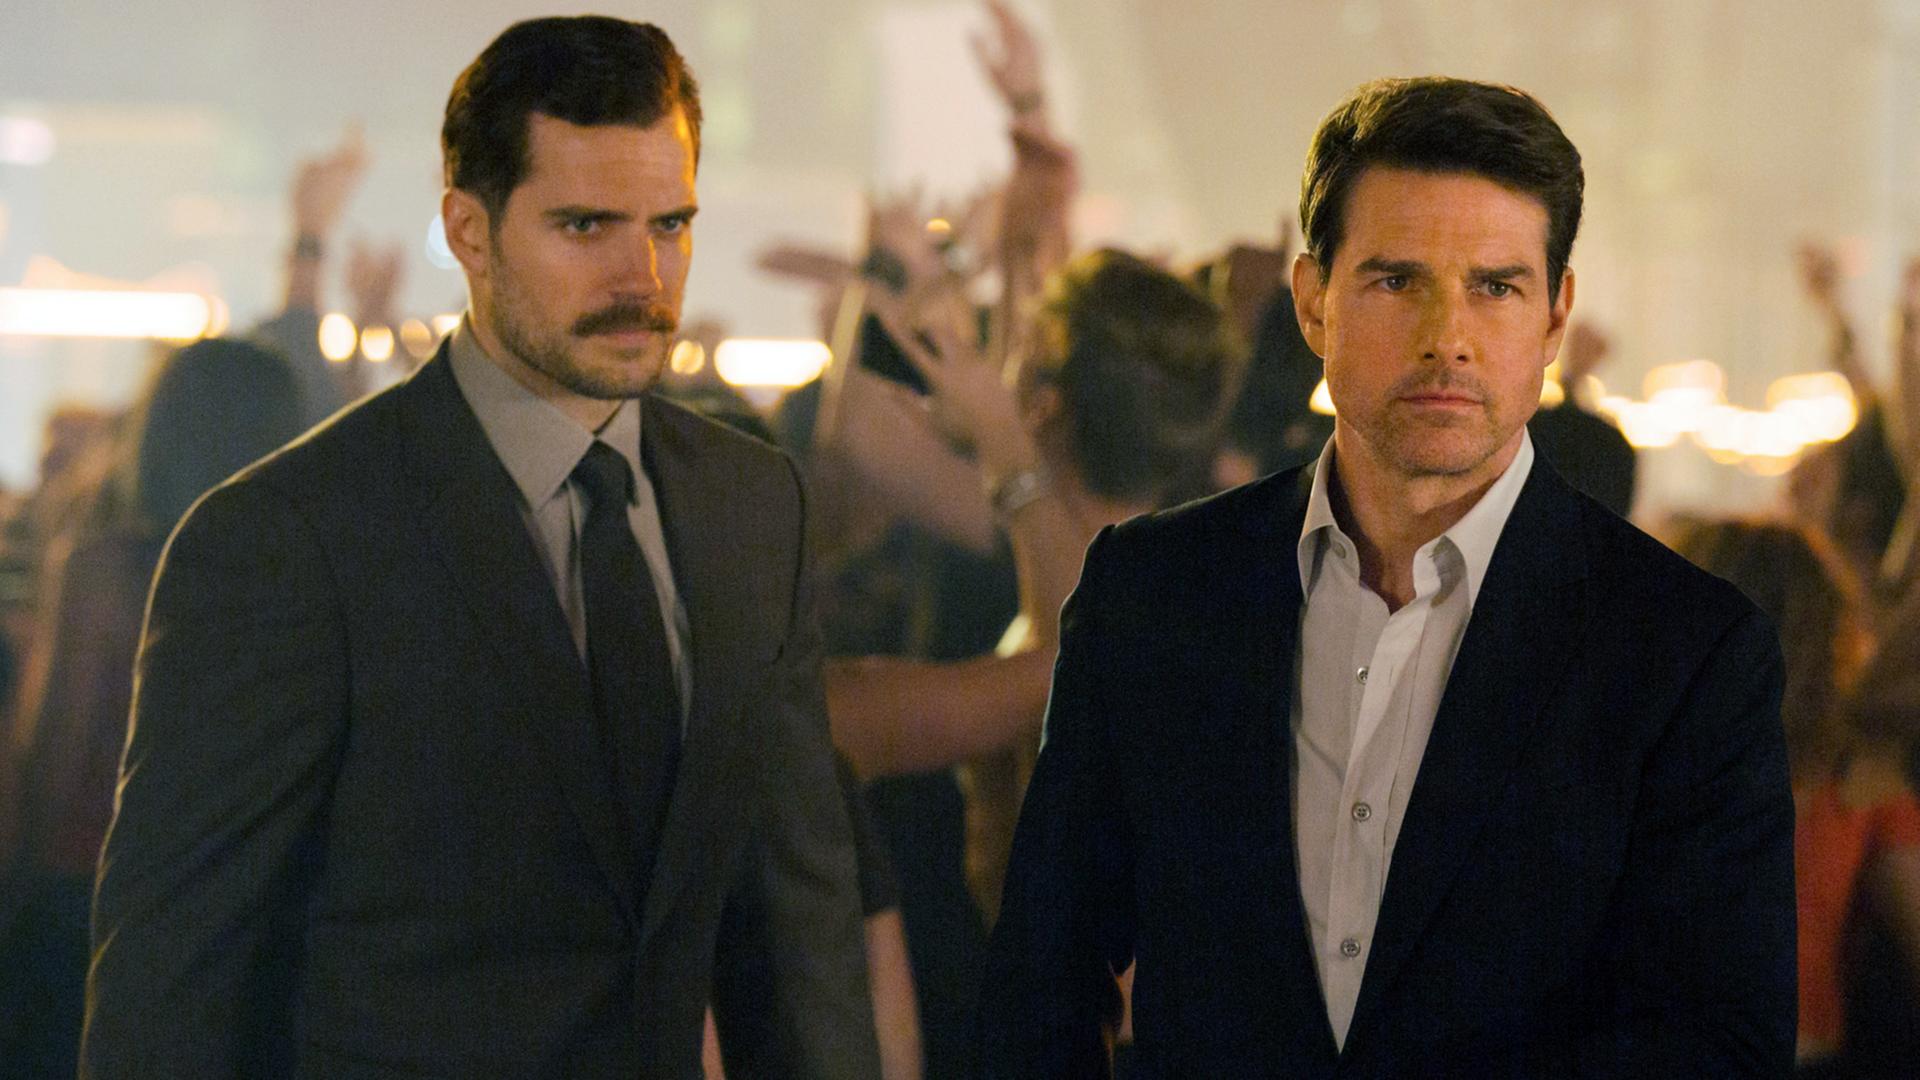 Filmstill aus "Mission: Impossible - Fallout" mit Tom Cruise (r.) und Henry Cavill